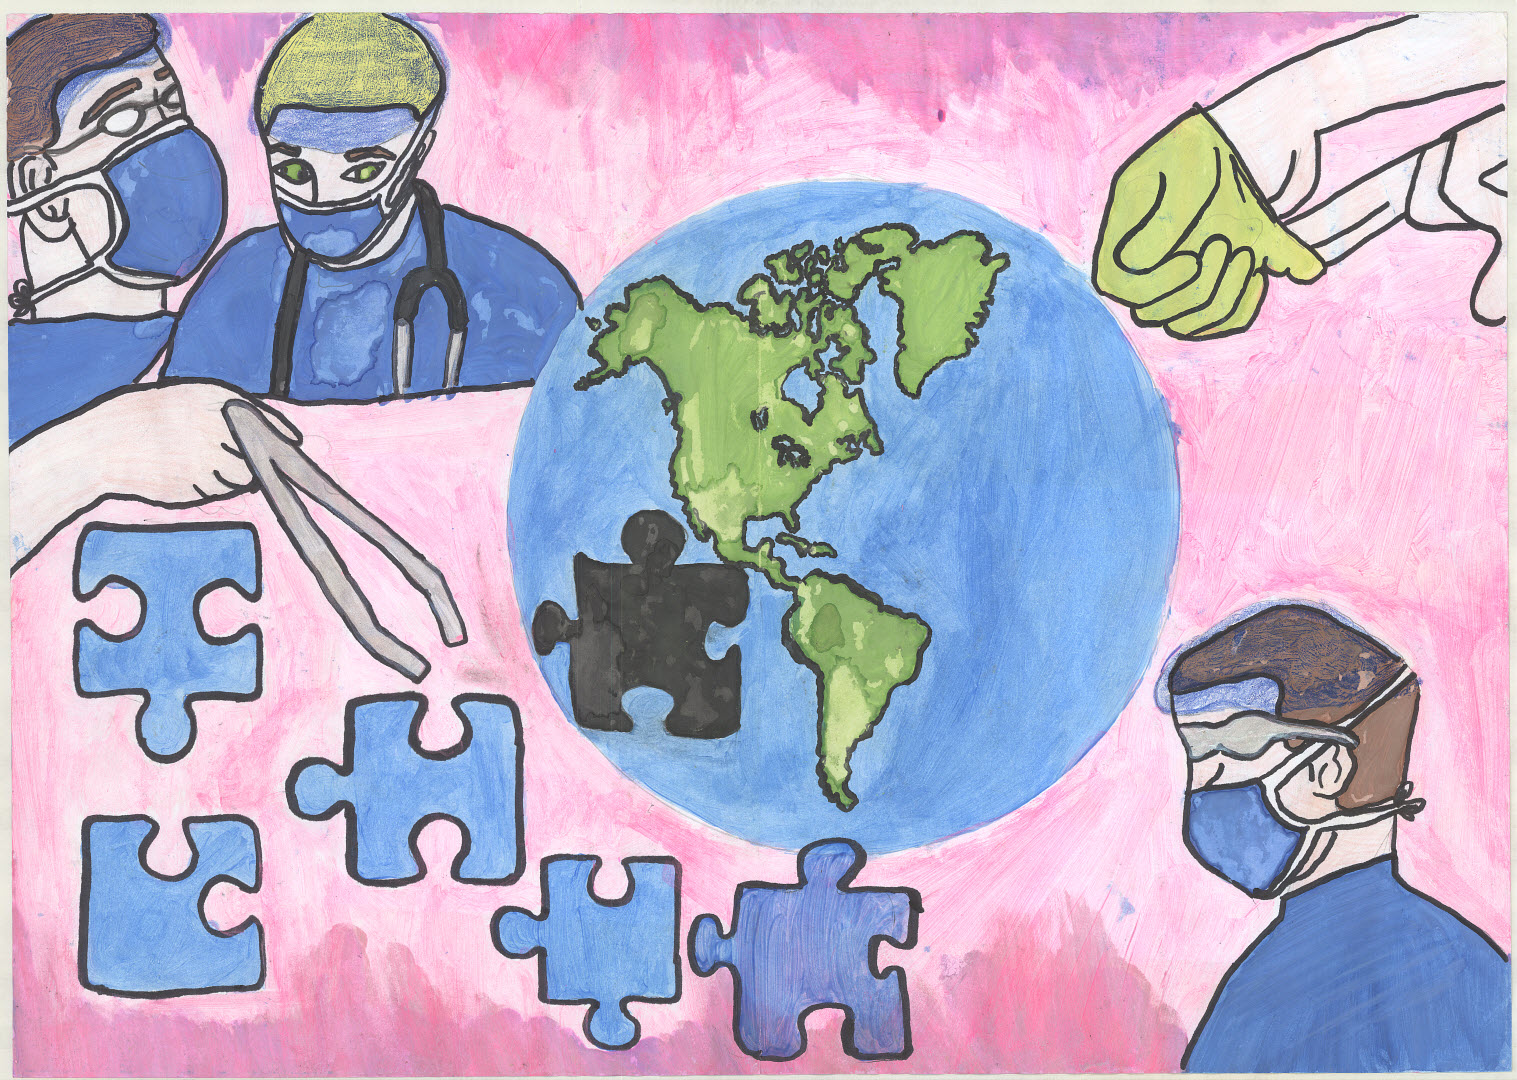 Shows the world as a puzzle, puzzle pieces and doctors wearing masks